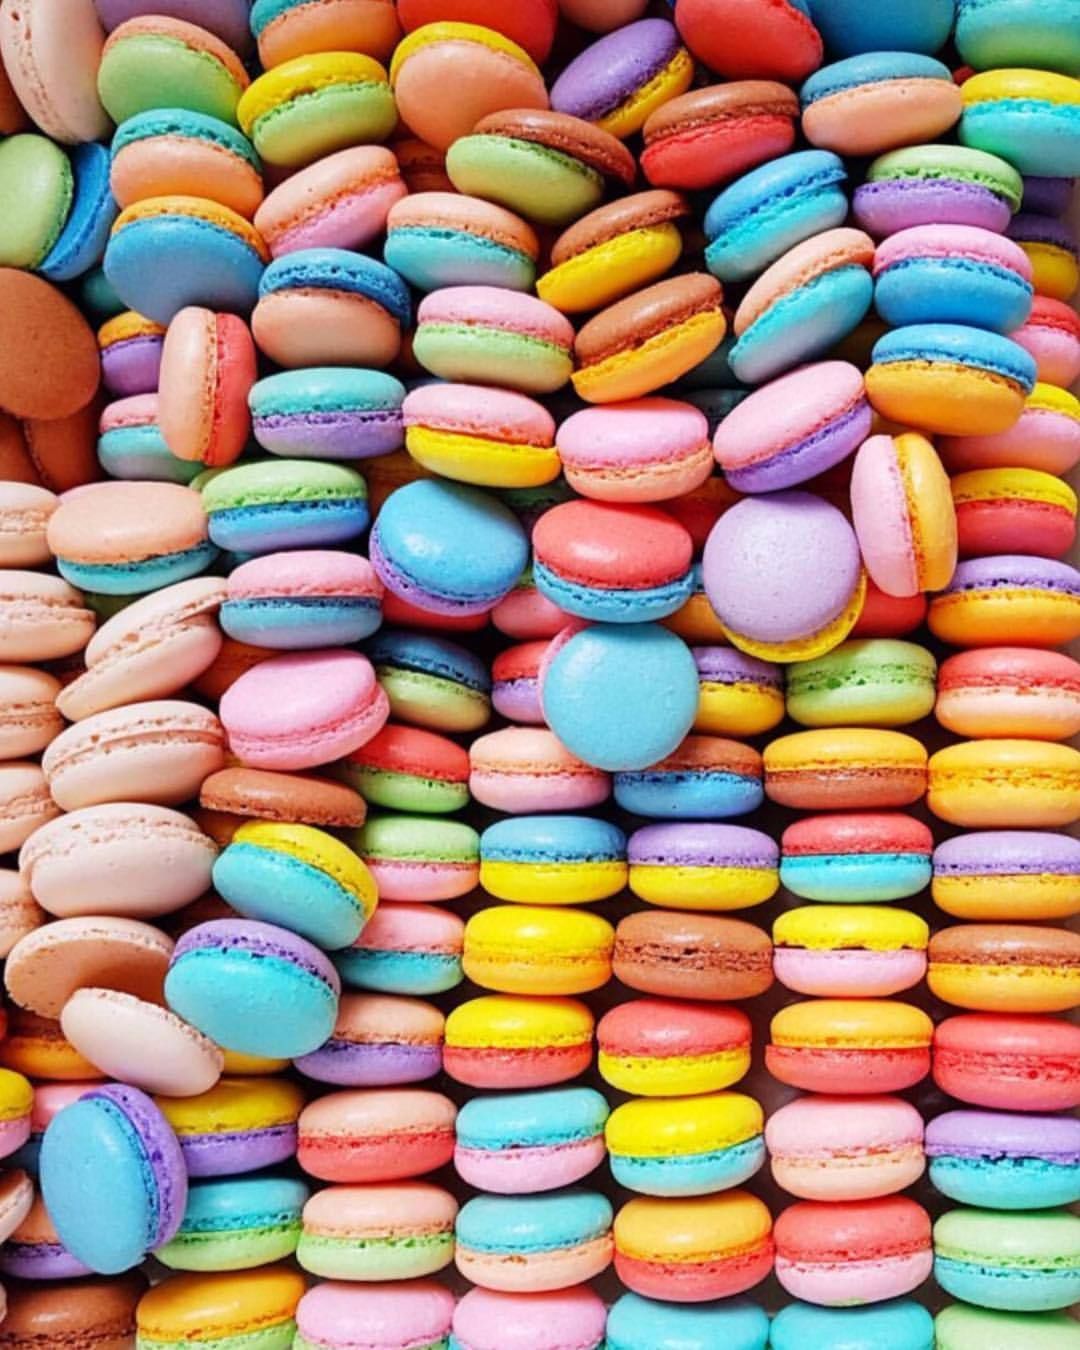 A pile of colorful macarons are stacked up - Colorful, macarons